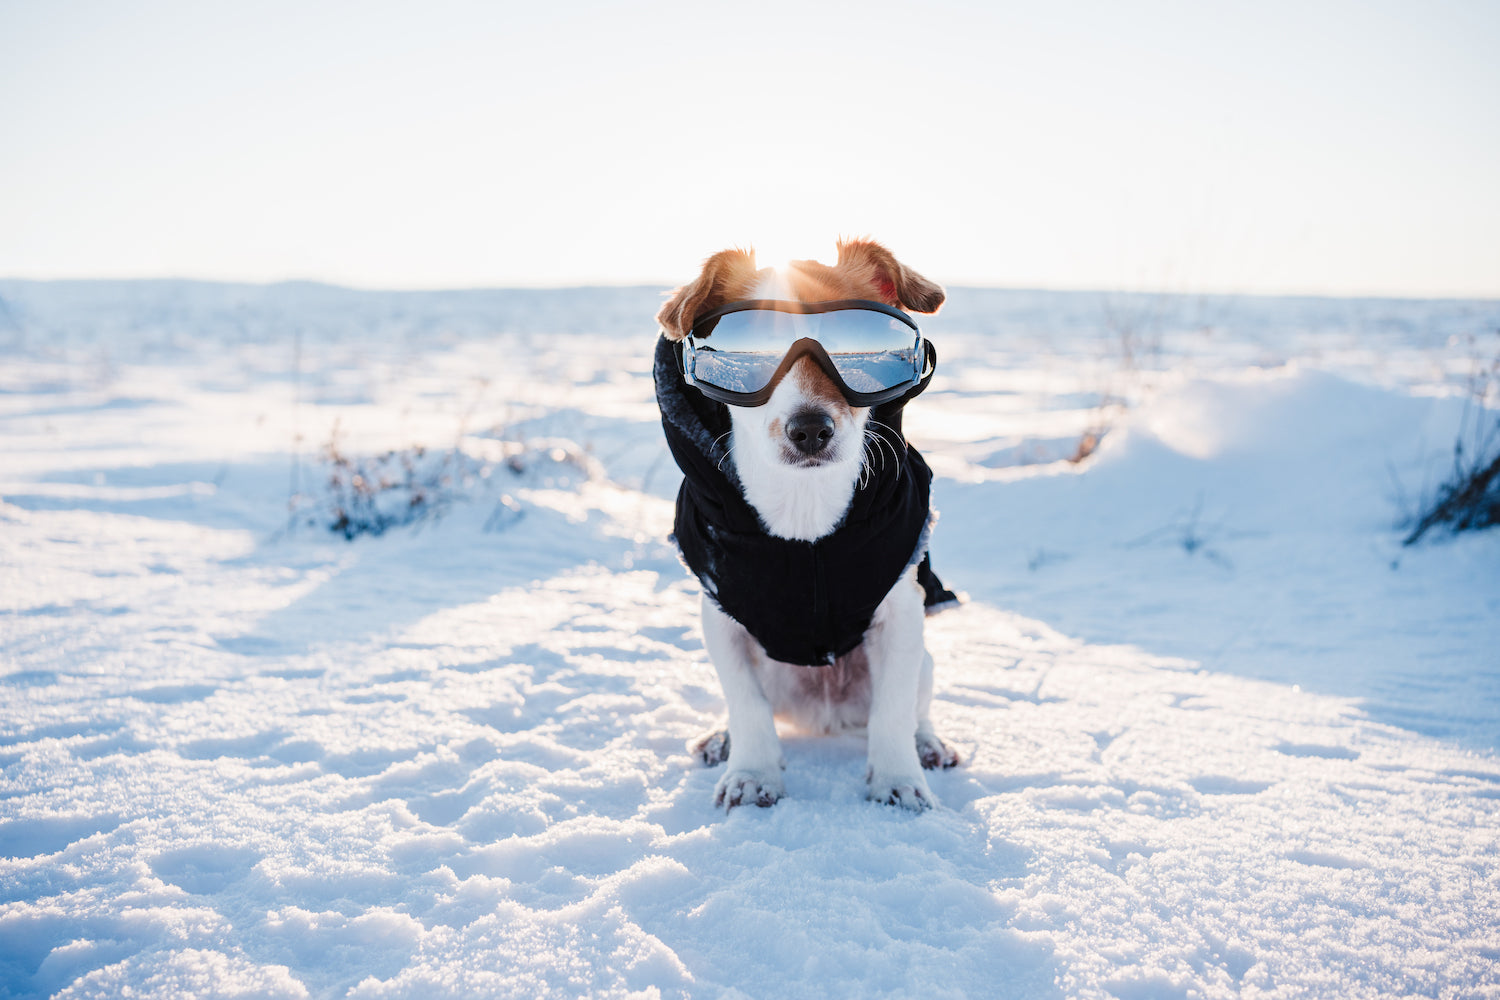 Why We Should Be Putting Coats on Dogs in Winter